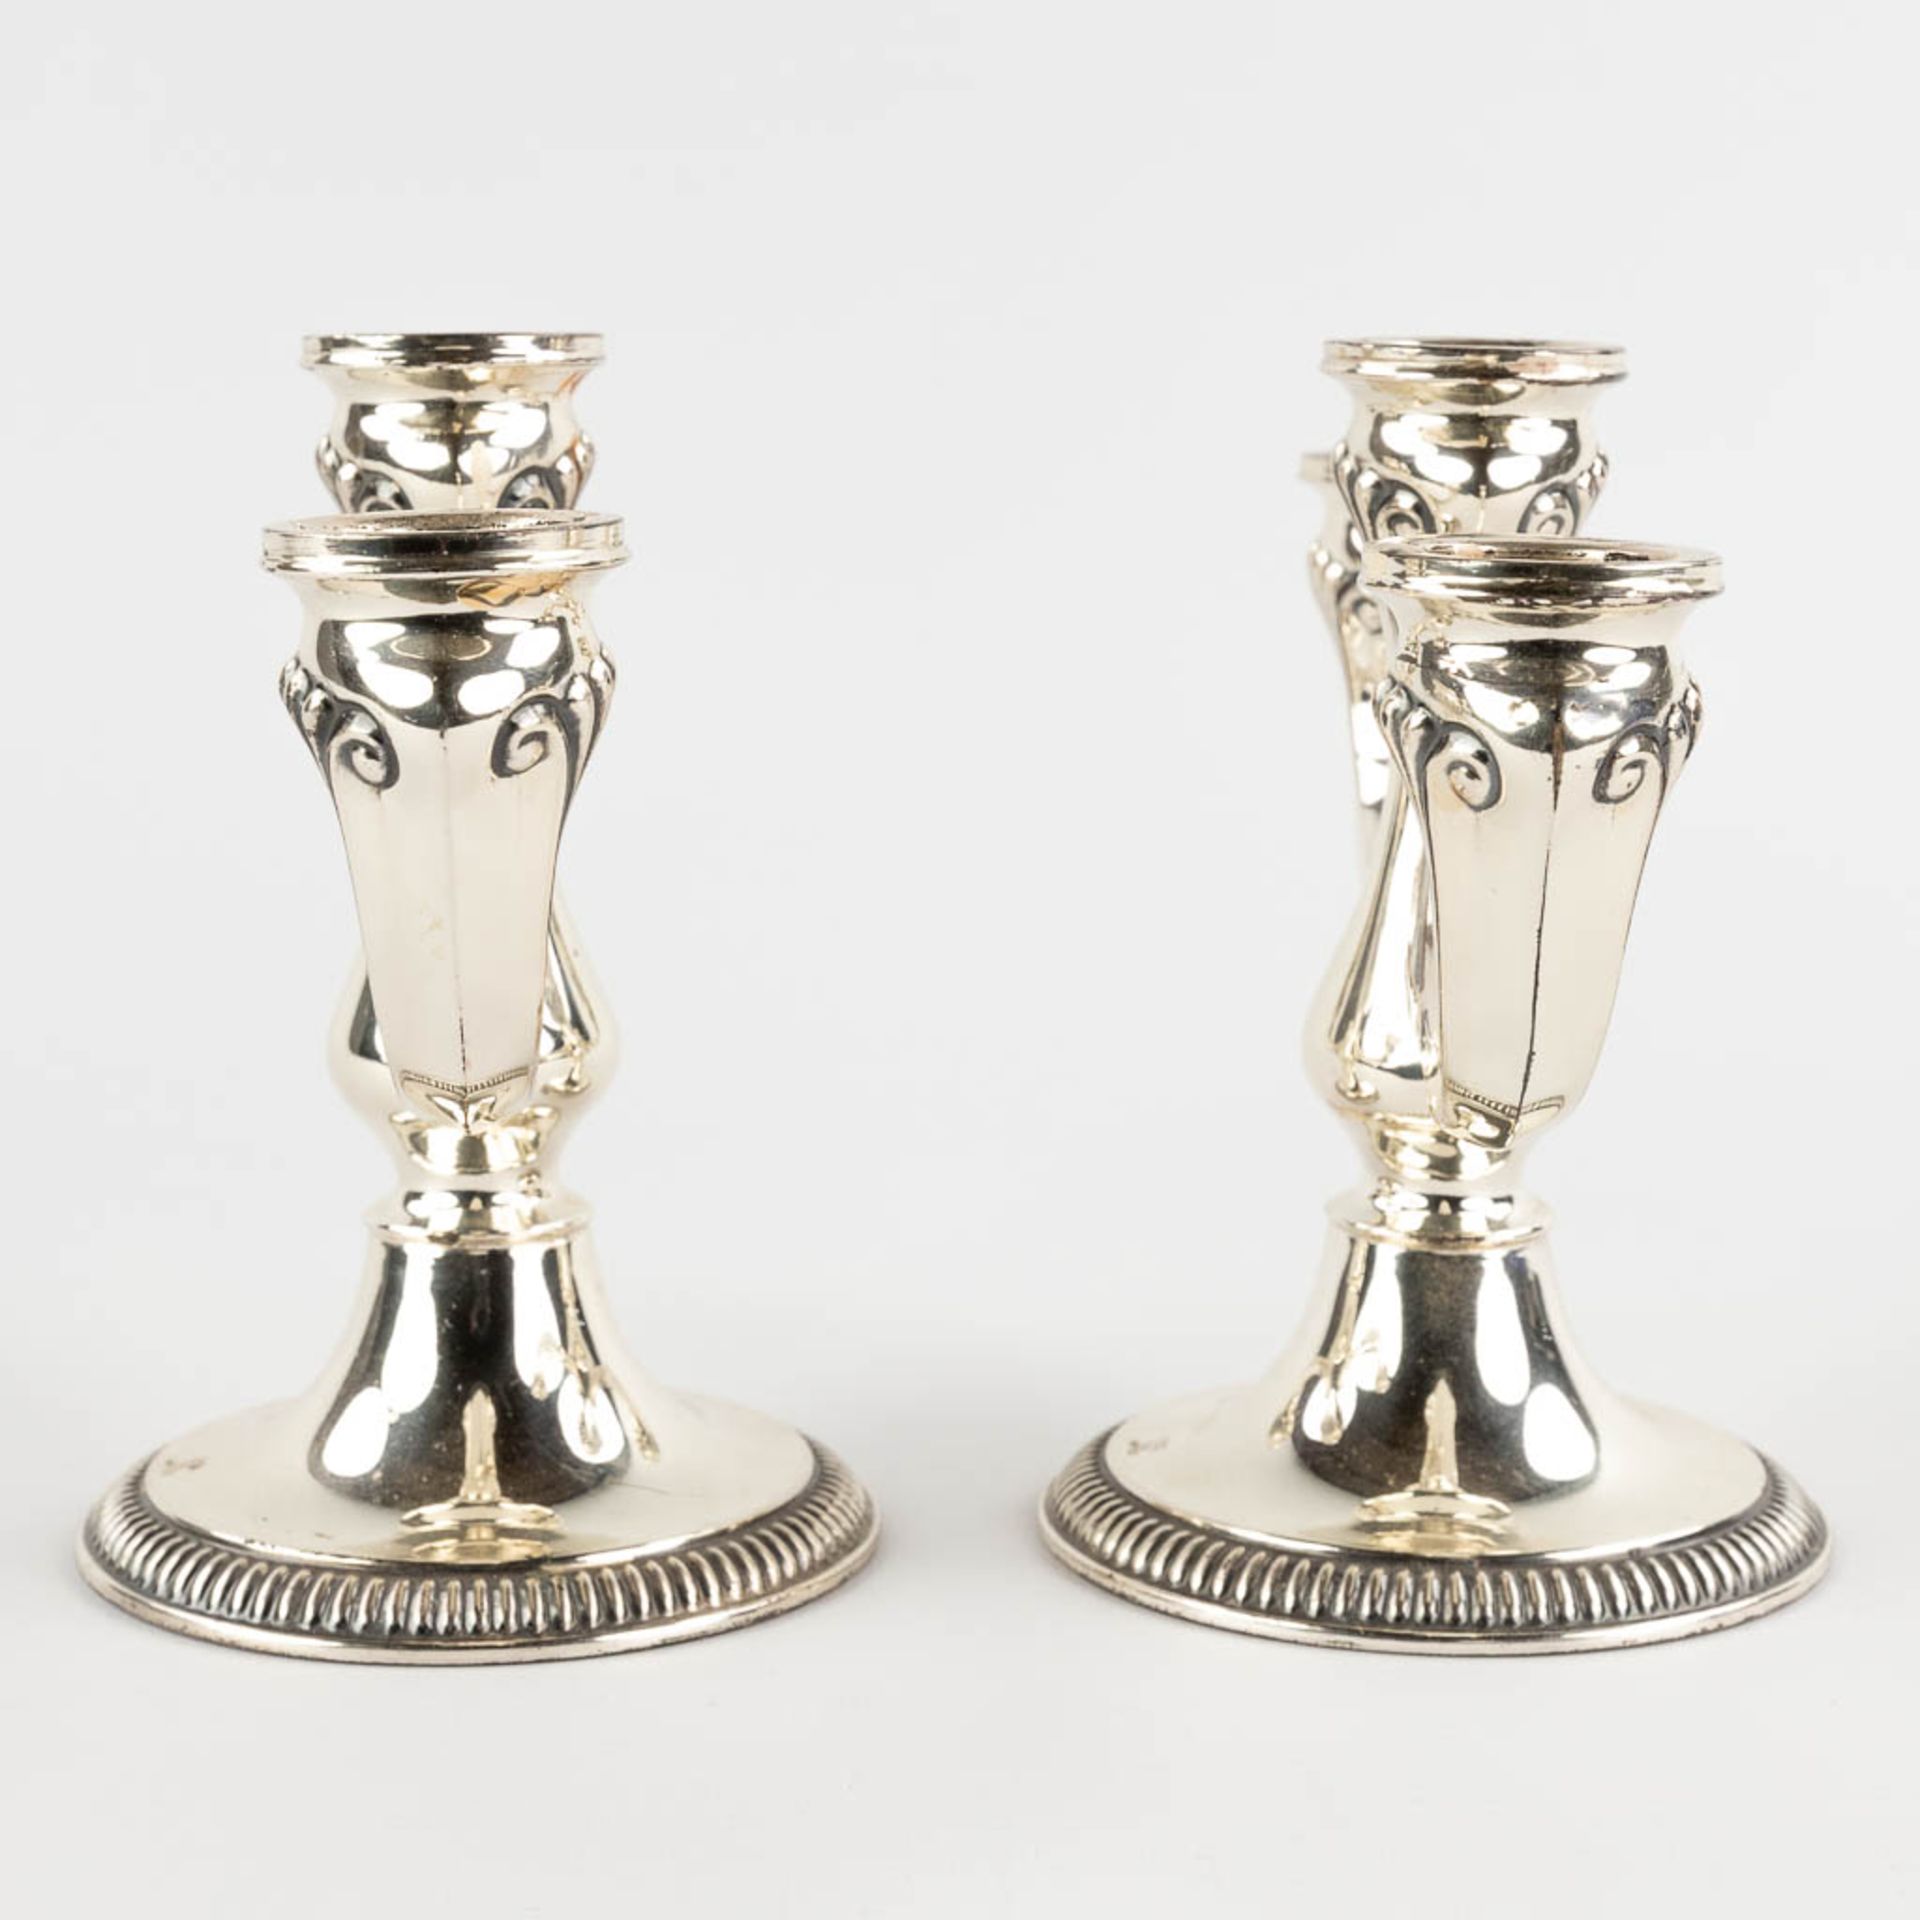 A pair of candelabra, silver. A835. gross: 589g (D:9 x W:20 x H:14 cm) - Image 6 of 10